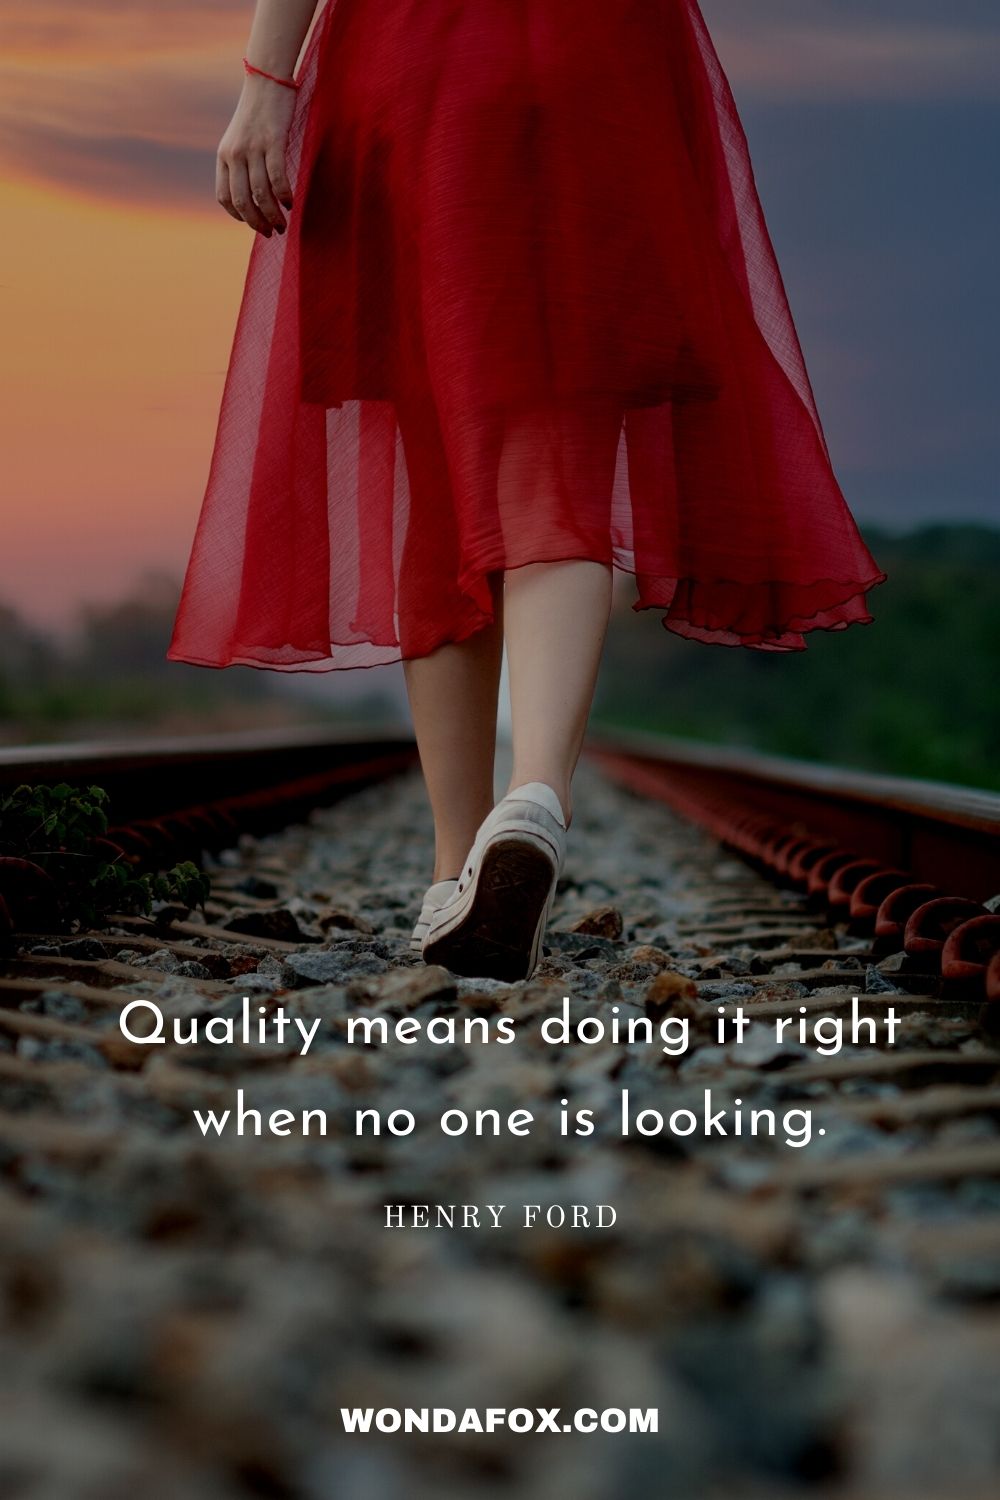 Quality means doing it right when no one is looking.” - work quotes